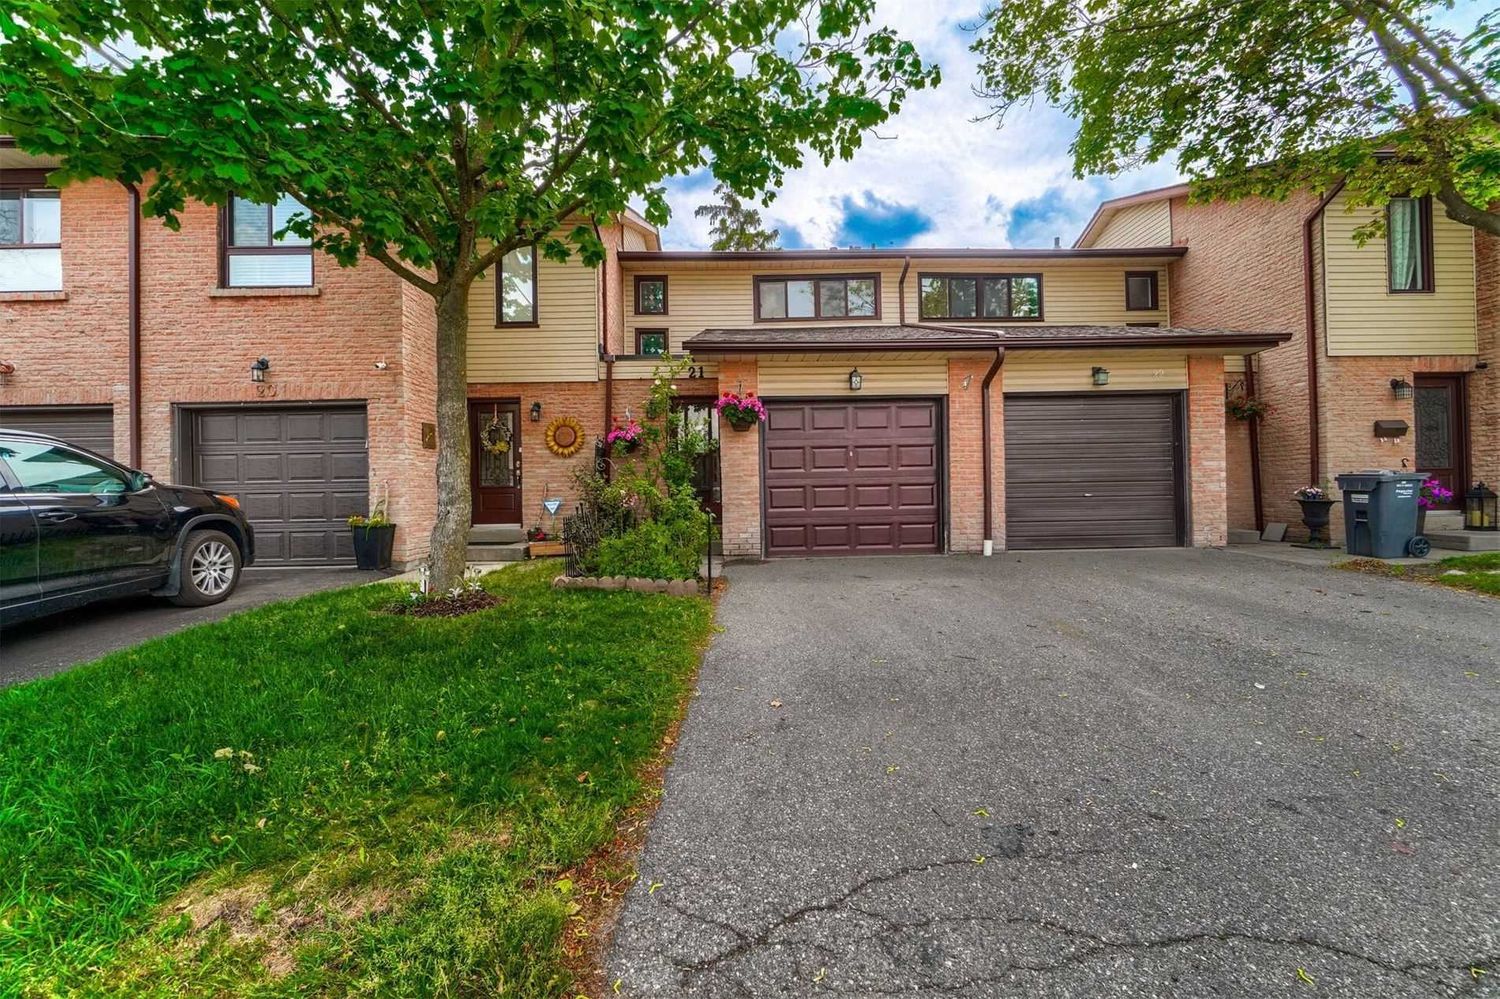 2-51 Collins Crescent. Collins Crescent Townhomes is located in  Brampton, Toronto - image #1 of 2